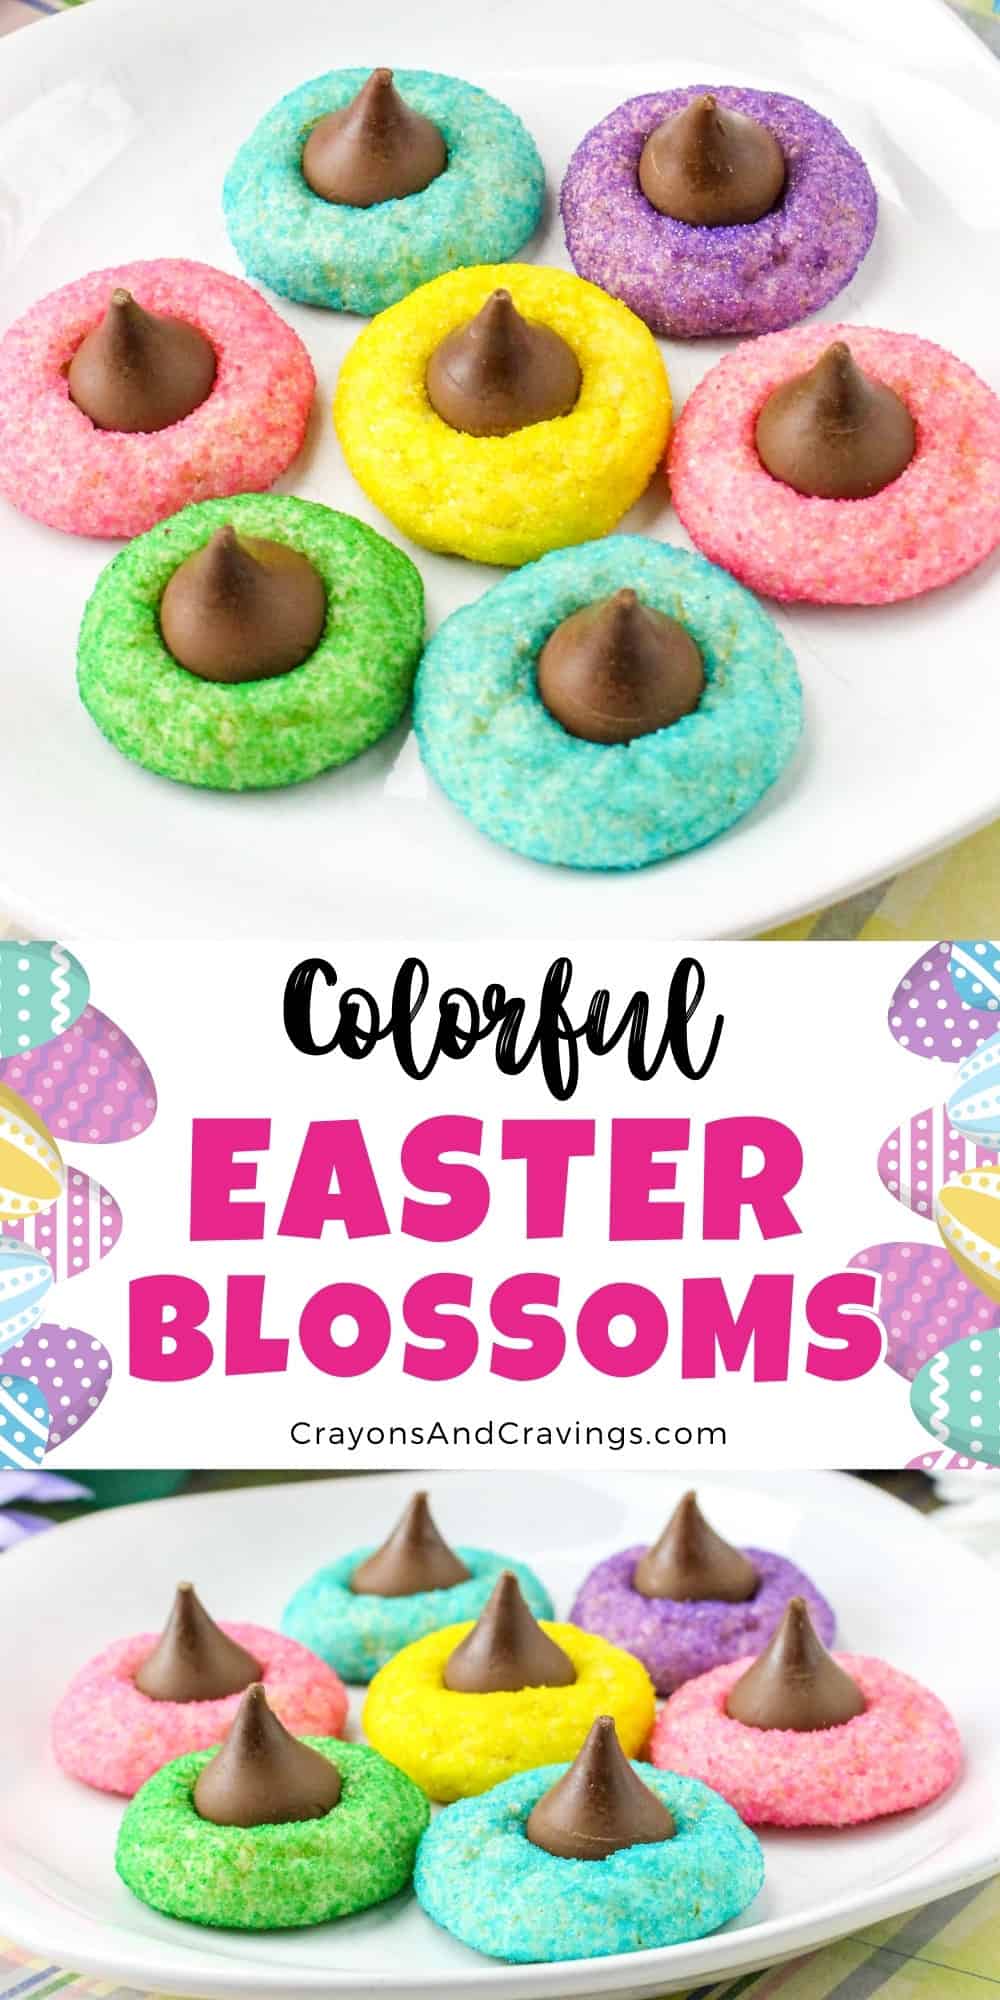 Colorful Easter Blossoms - Pinterest Graphic